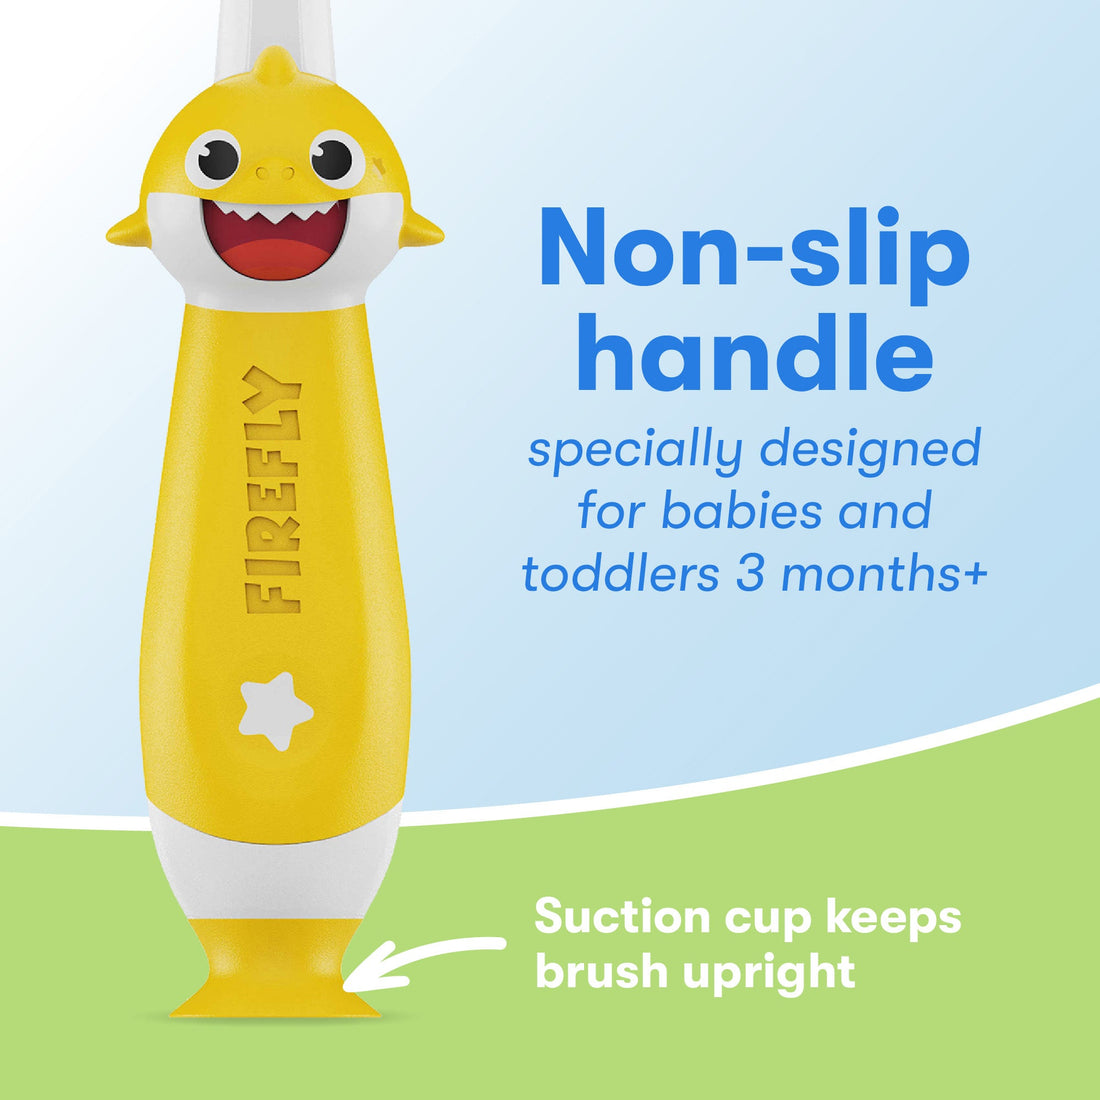 First Firefly Baby Shark Light up toothbrush, Non-slip handle specially designed for babies and toddlers 3 months+, arrow pointing at suction cup that keeps brush upright